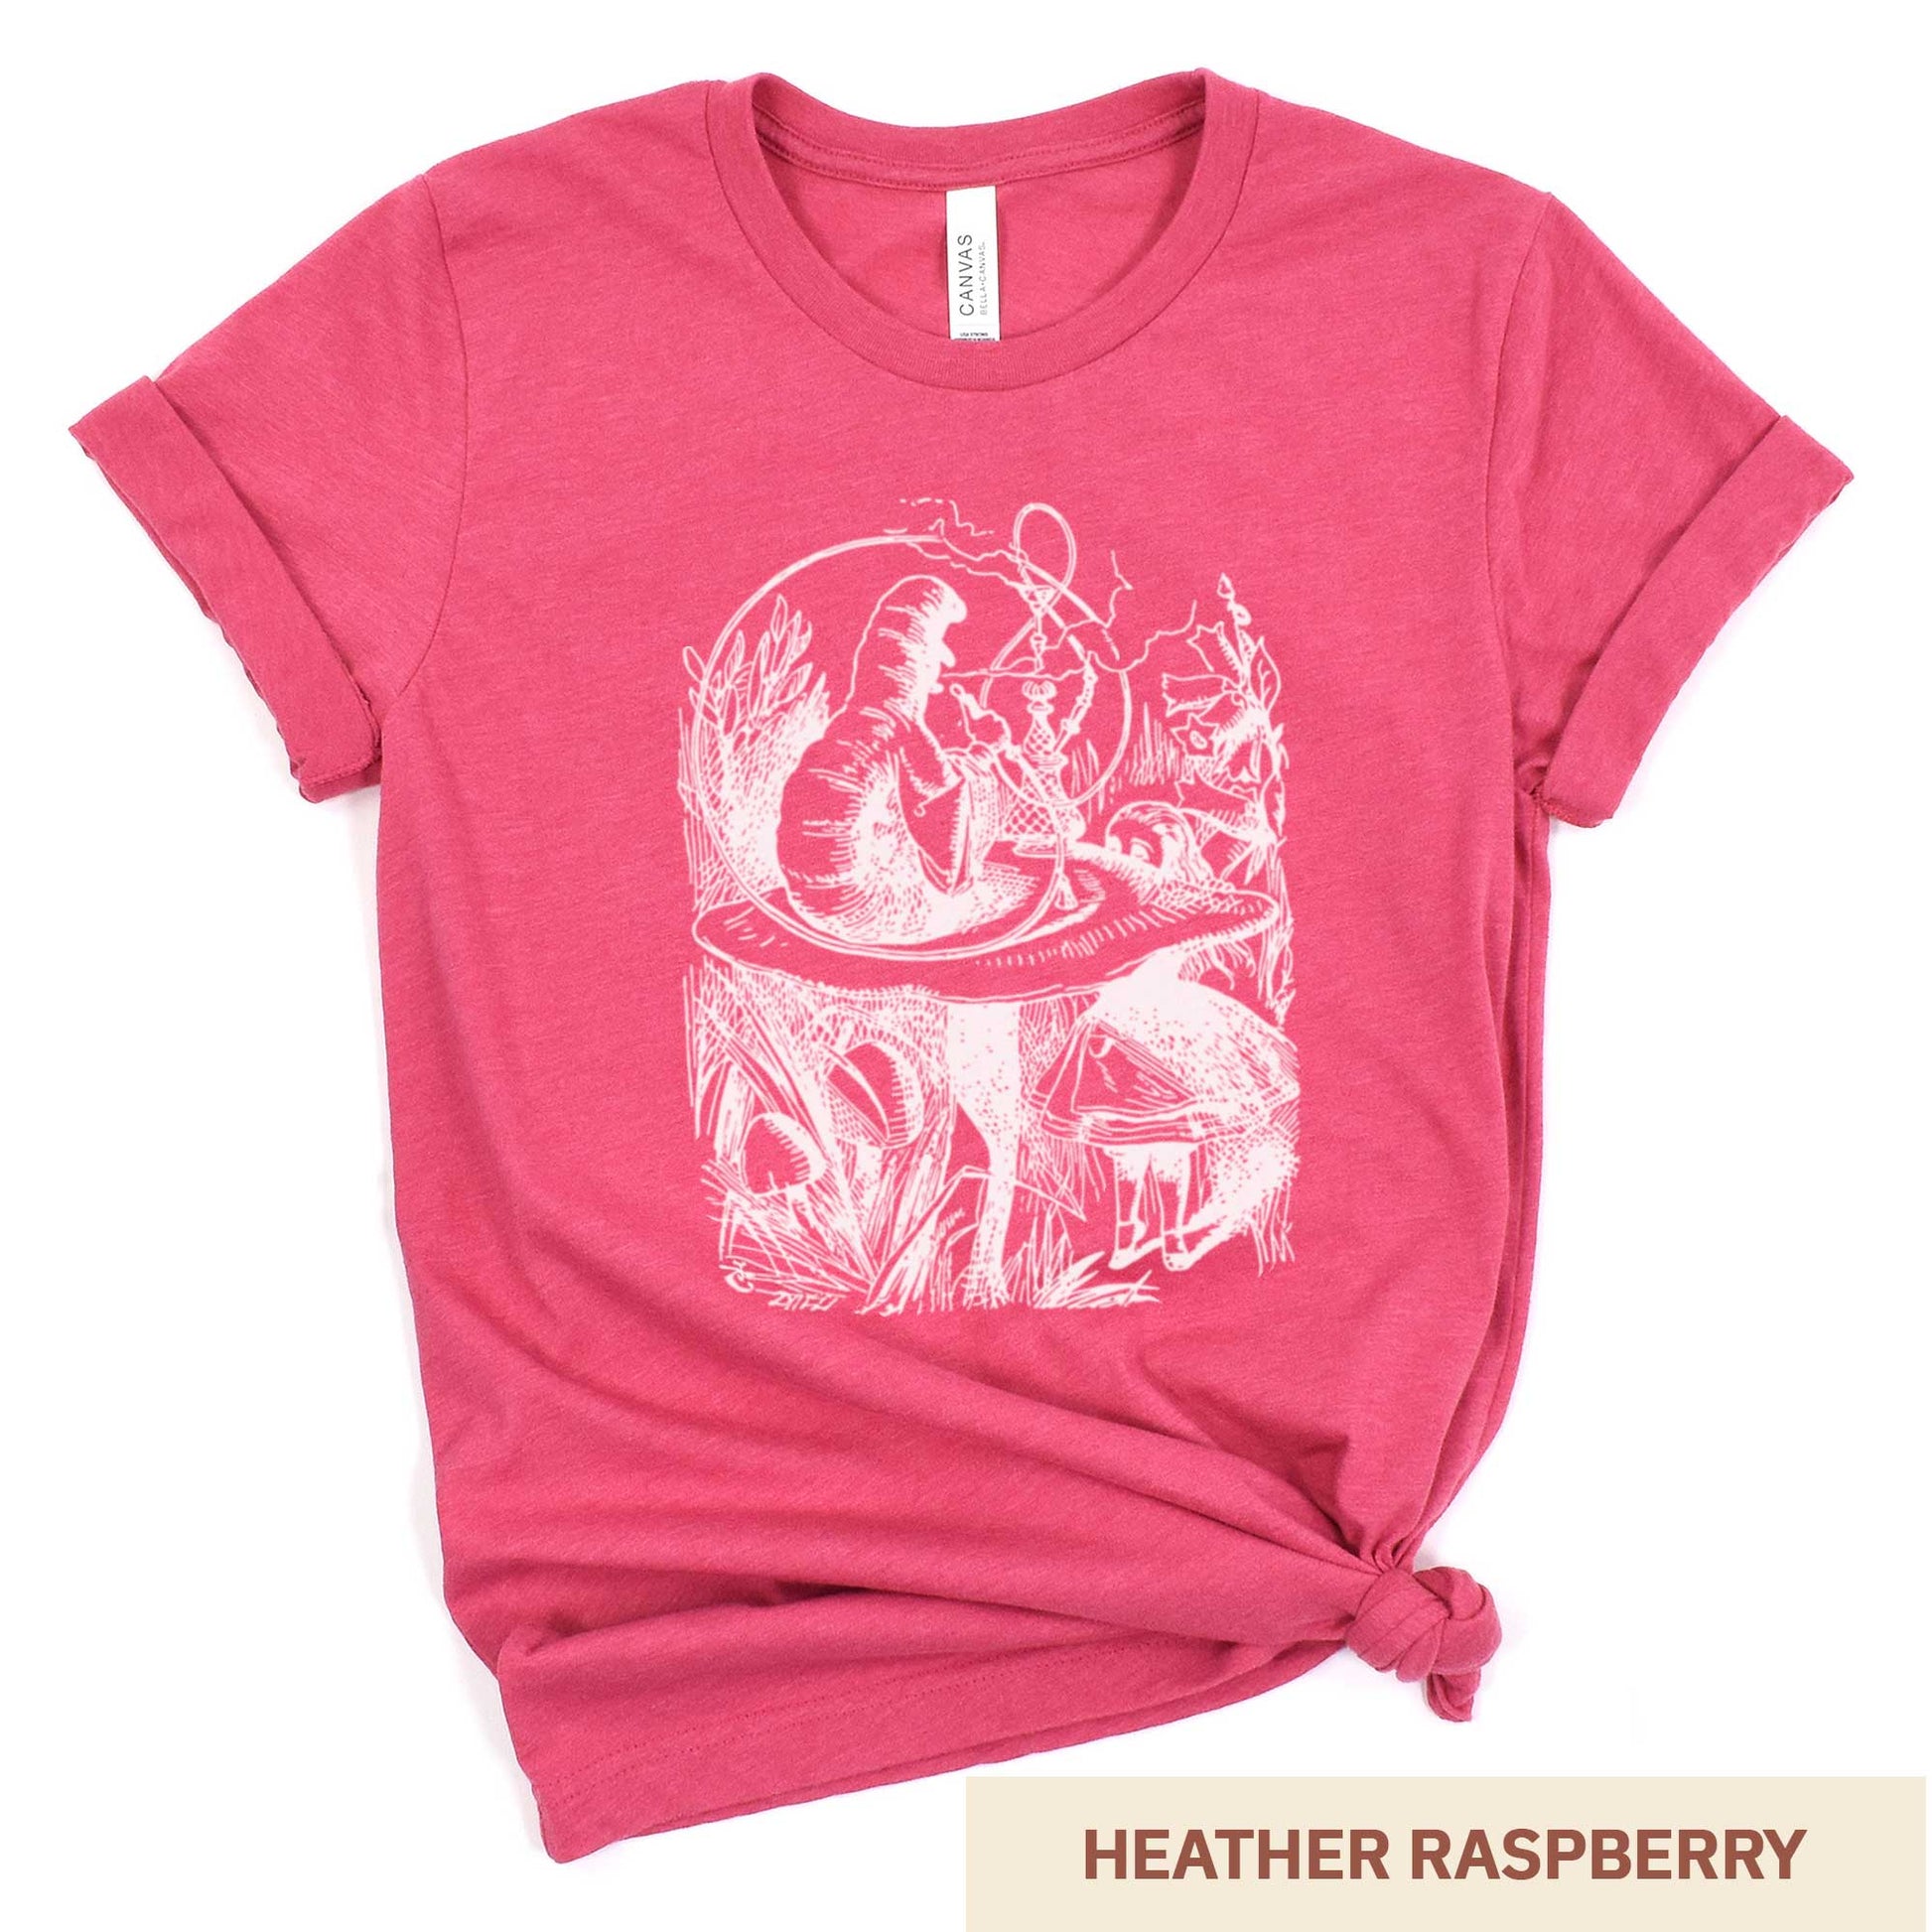 A heather raspberry Bella Canvas t-shirt featuring the John Tenniel illustration of Alice in Wonderland meeting the caterpillar who is sitting on a mushroom.